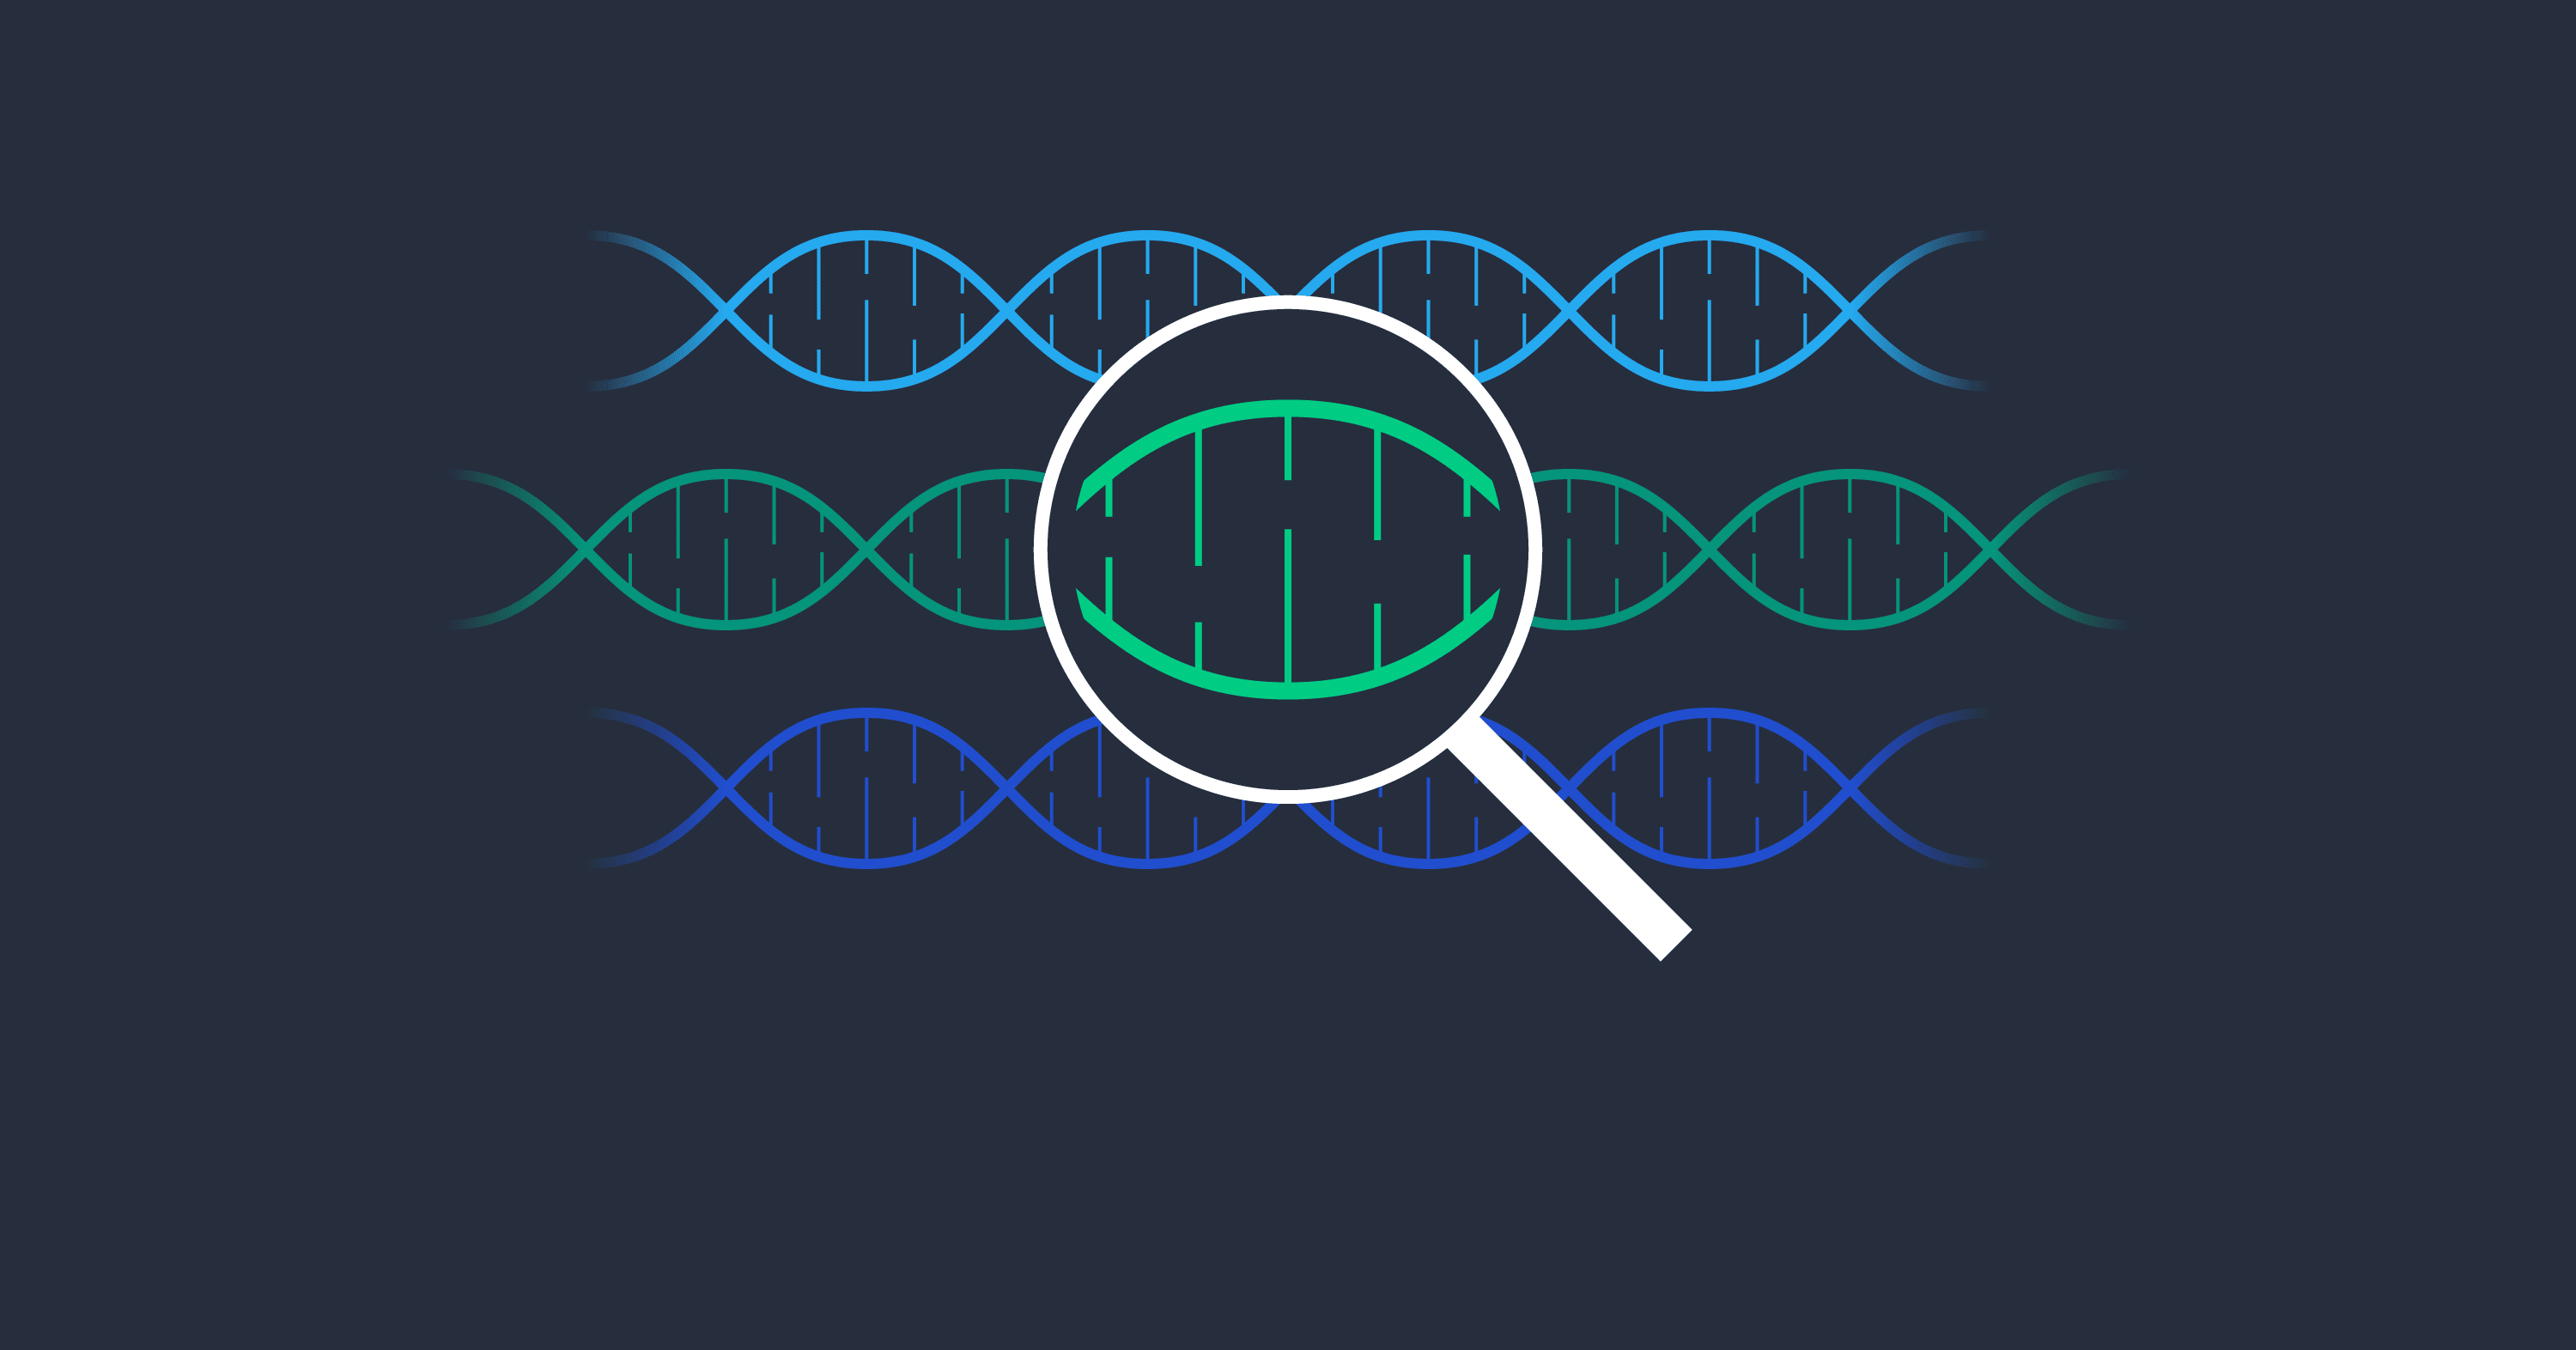 Genetic Algorithms: Search and Optimization by Natural Selection